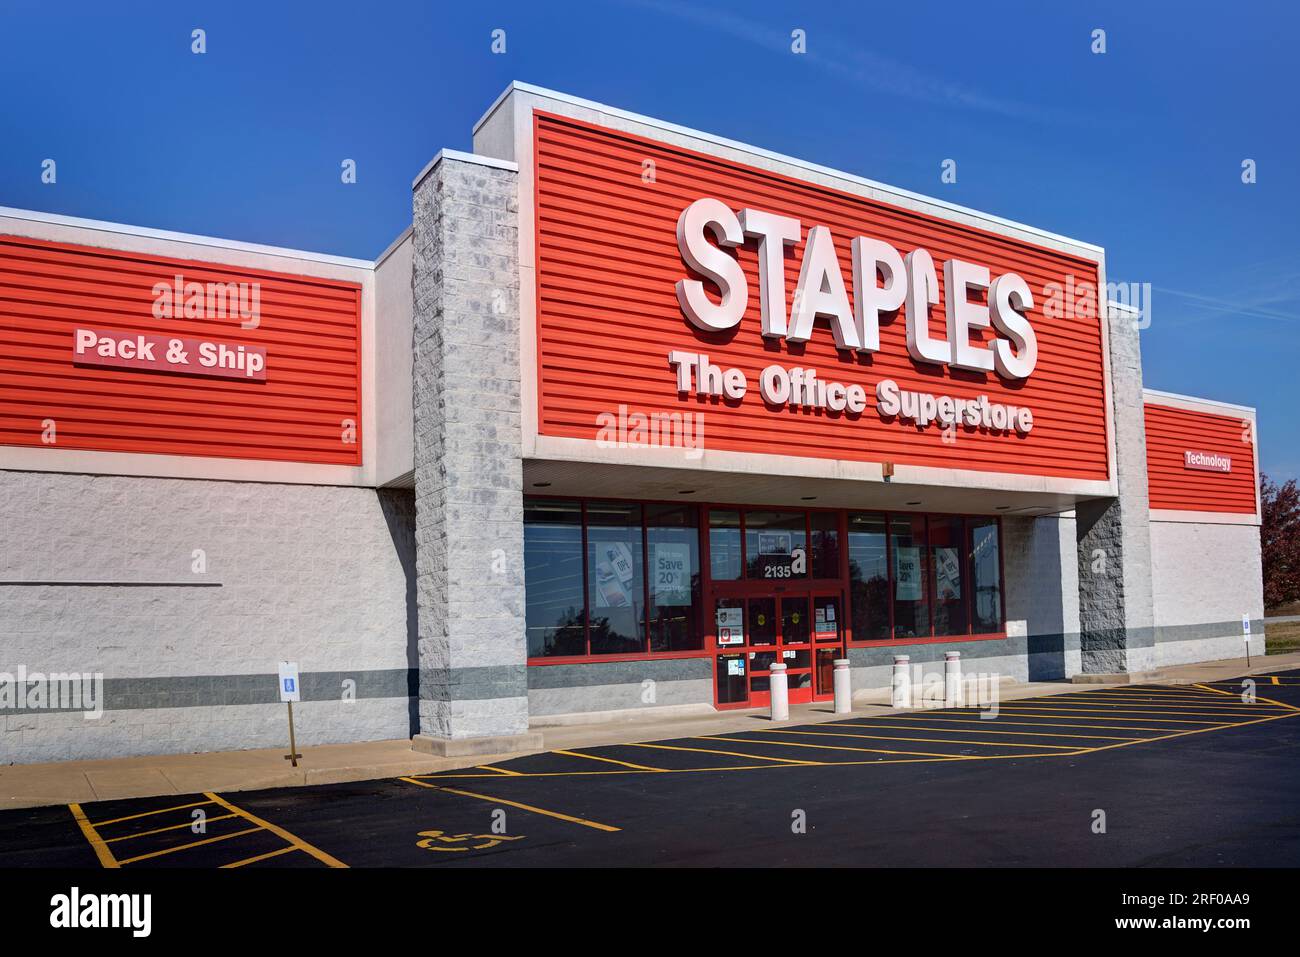 Springfield, Missouri - November 4, 2019: Staples Inc. is an American office retail company primarily selling office supplies and related products. Stock Photo